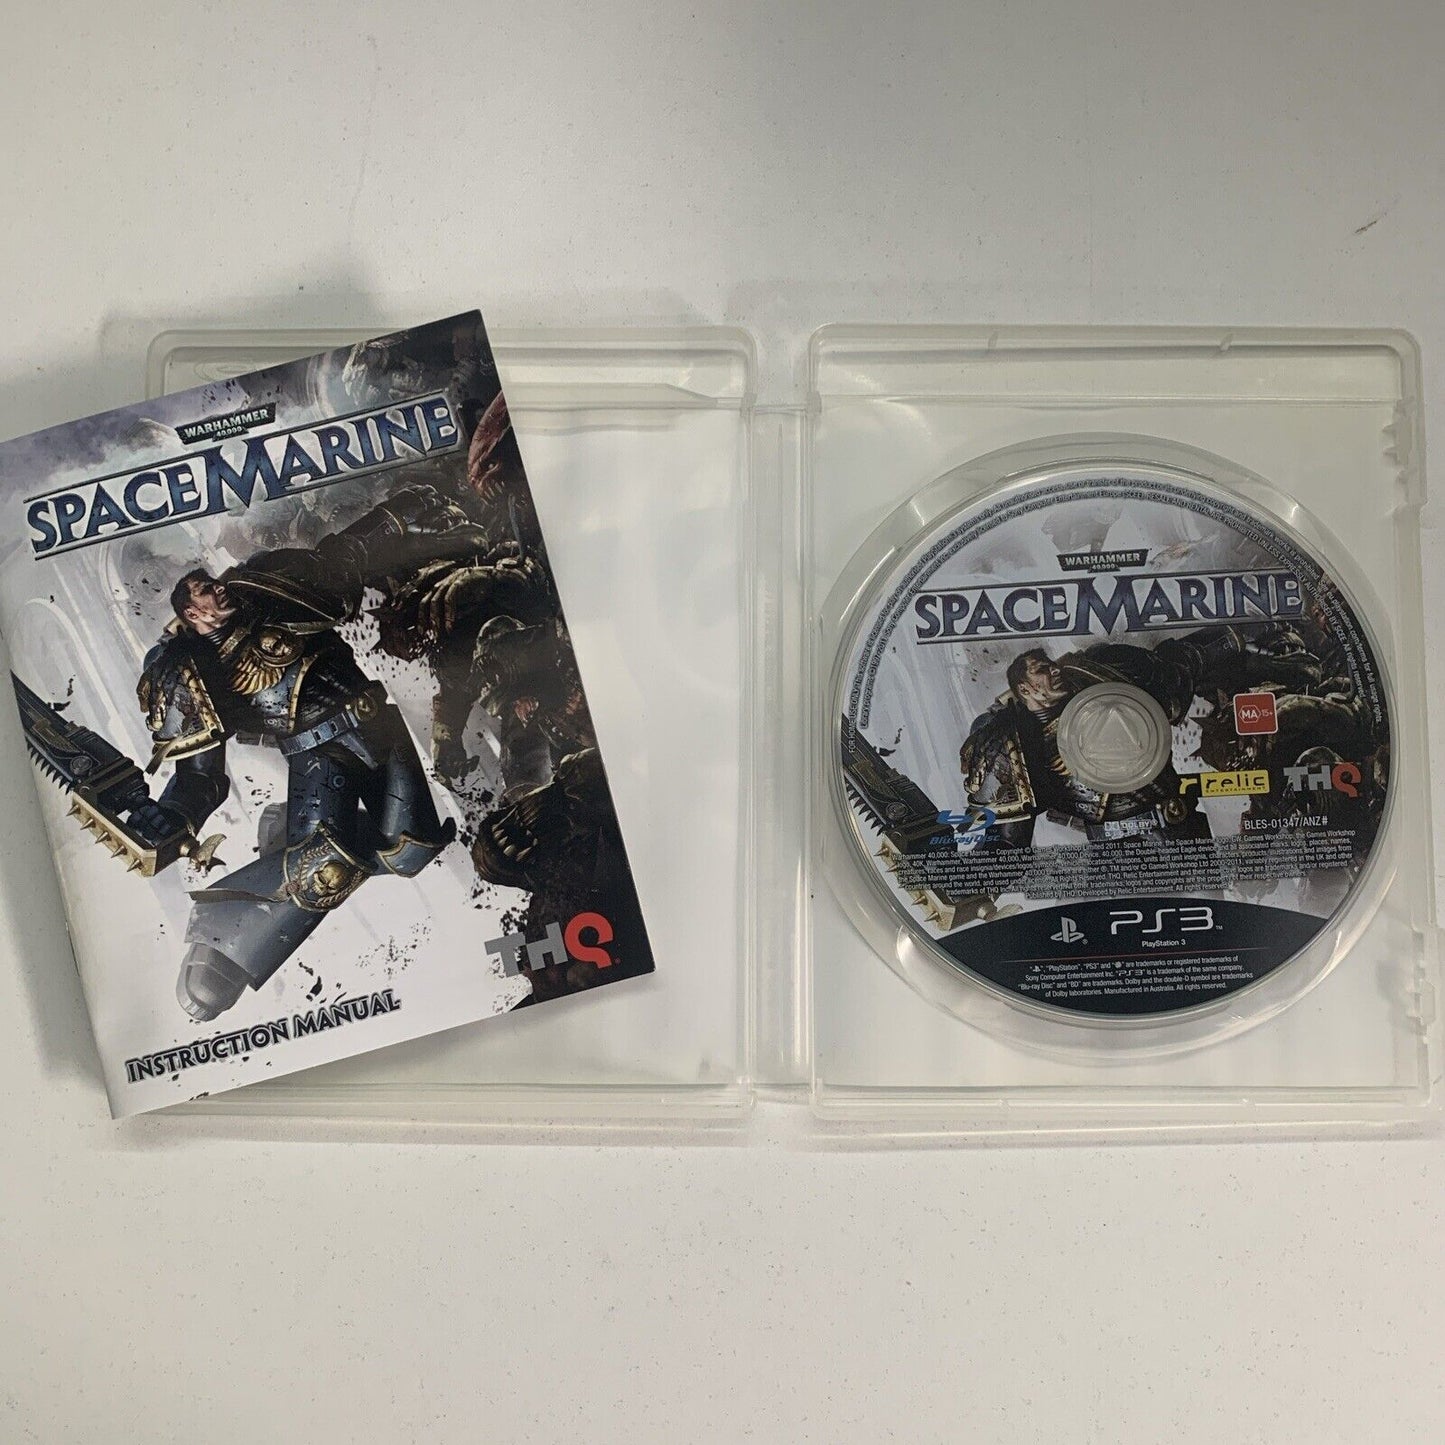 Warhammer 40,000 Space Marine PlayStation 3 PS3 Game